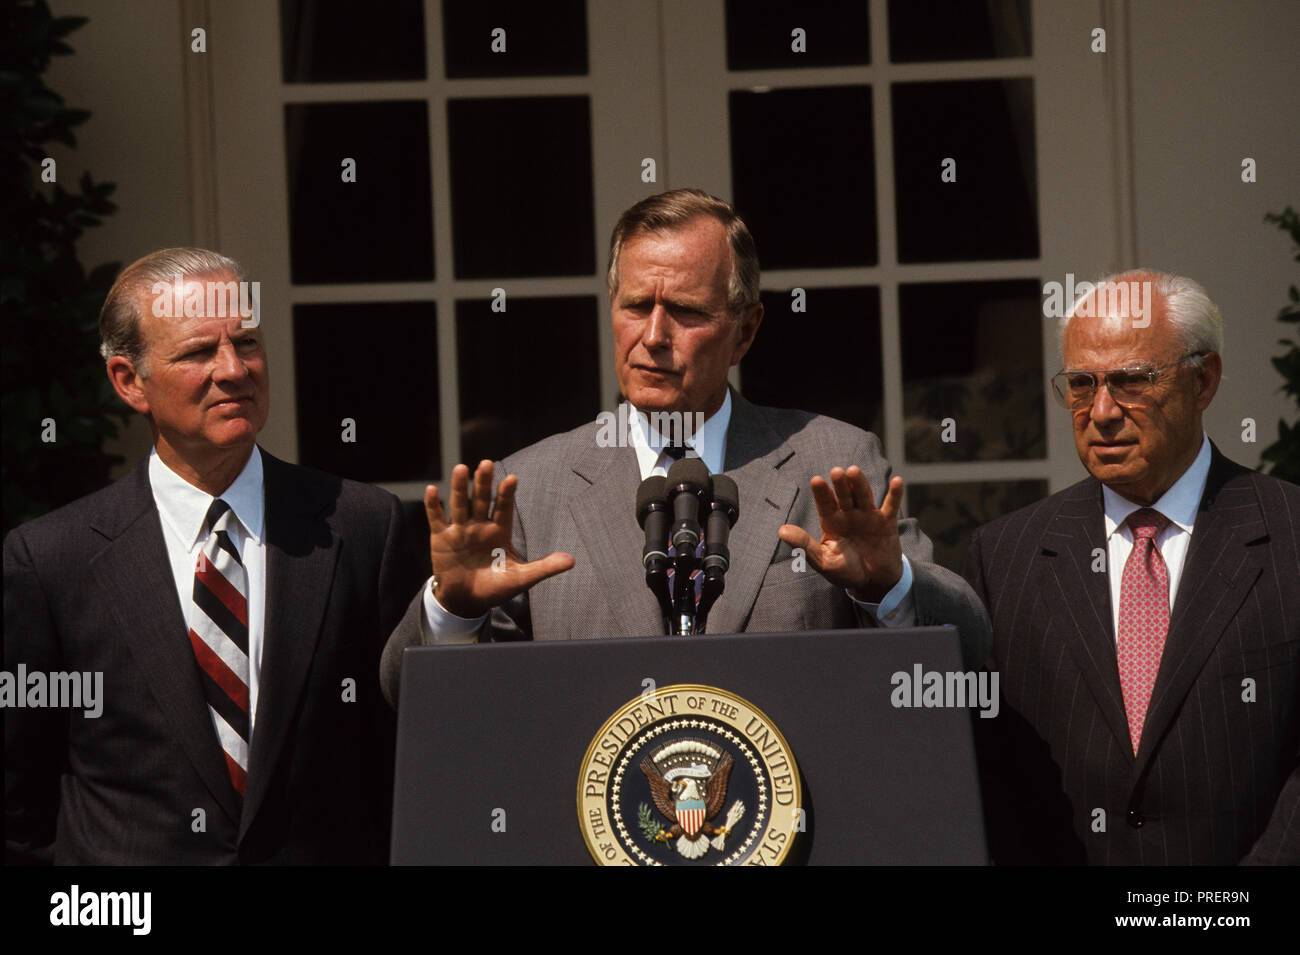 President HW Bush  (Bush 41) making a statement in the Rose Garden of the White House with James Baker and Robert Strauss    Photograph by Dennis Brack bb24 Stock Photo